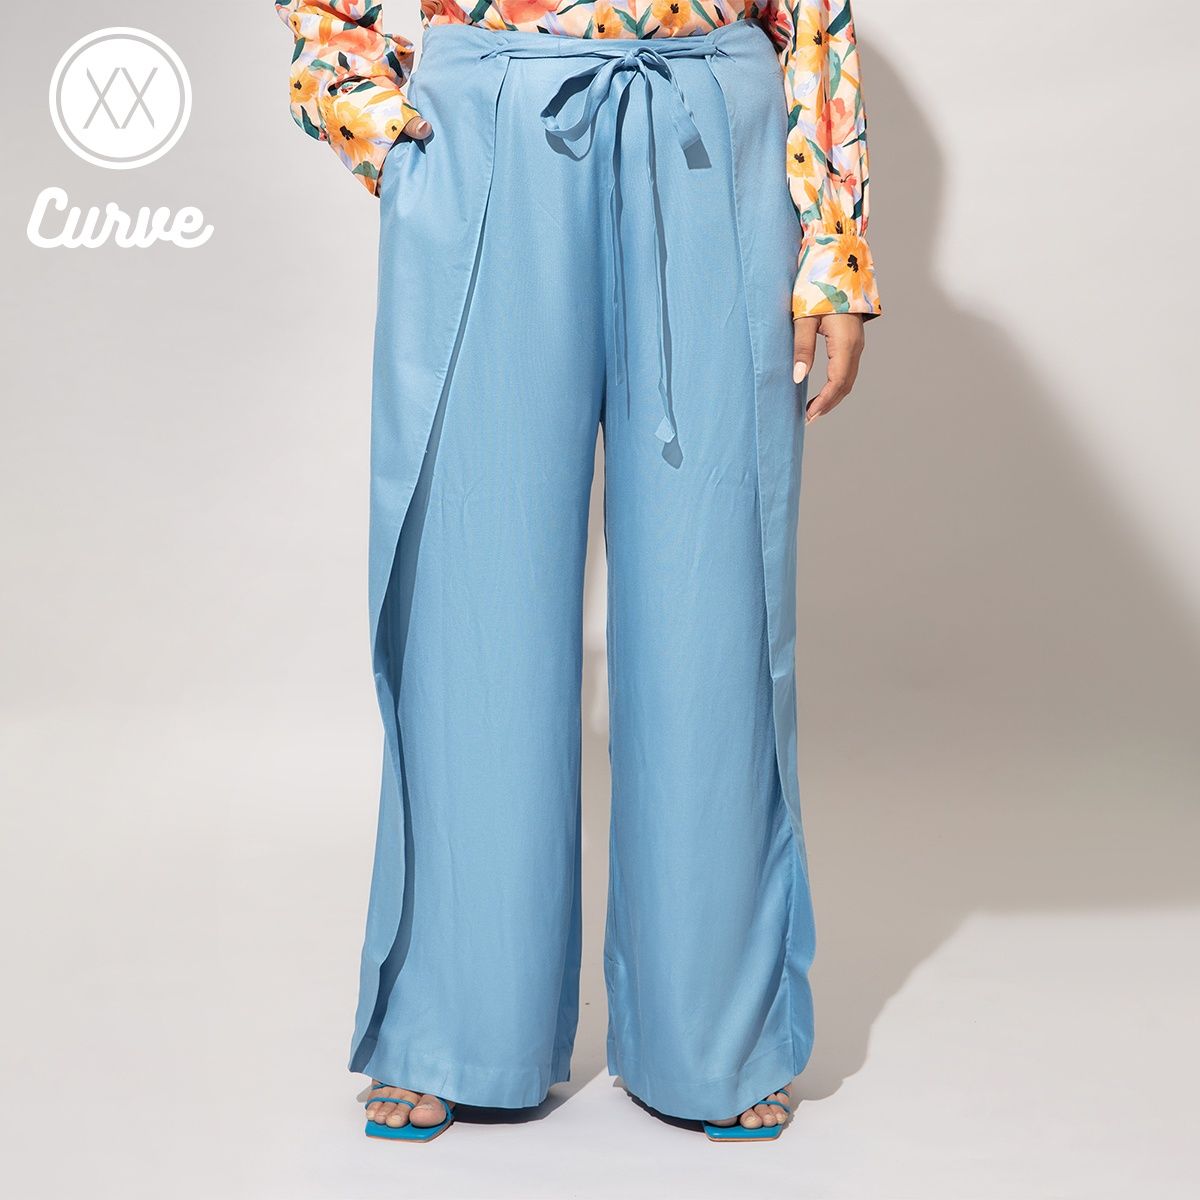 Buy Light blue palazzo trousers made of suiting fabric: trousers, light blue  color, suiting fabric, casual style, buy in VOVK online store.